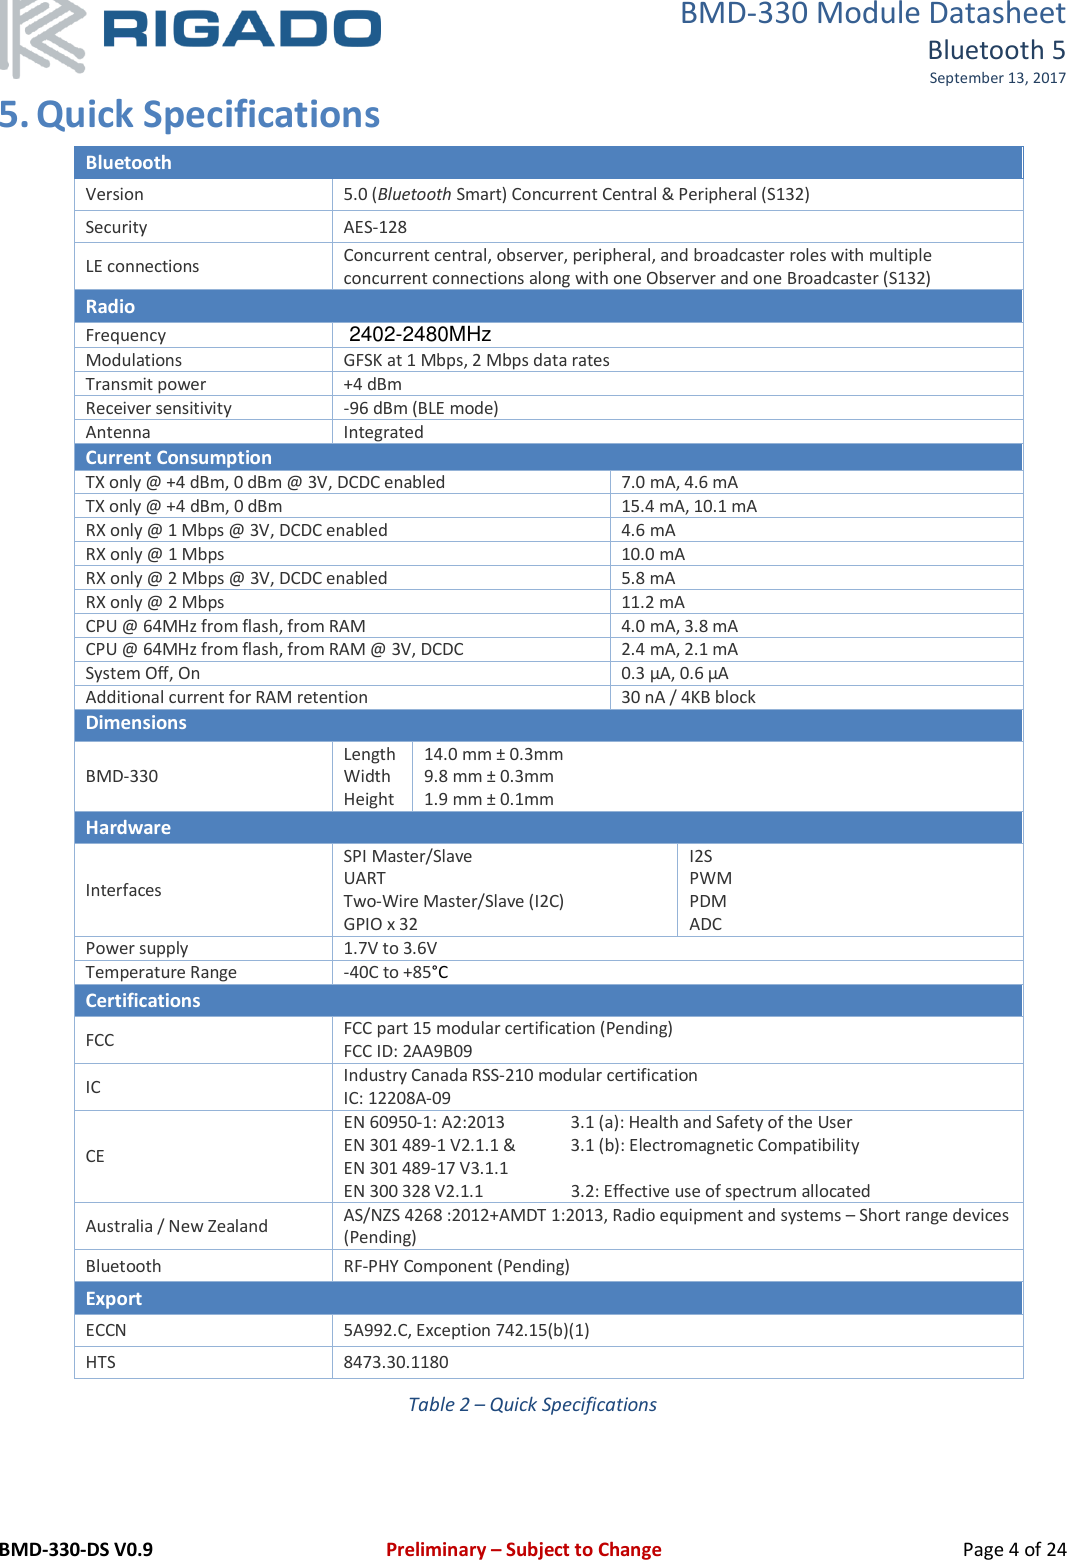 BMD-330 Module Datasheet Bluetooth 5 September 13, 2017 BMD-330-DS V0.9     Preliminary – Subject to Change   Page 4 of 24 5. Quick Specifications  Bluetooth Version  5.0 (Bluetooth Smart) Concurrent Central &amp; Peripheral (S132) Security  AES-128 LE connections  Concurrent central, observer, peripheral, and broadcaster roles with multiple concurrent connections along with one Observer and one Broadcaster (S132) Radio Frequency Modulations  GFSK at 1 Mbps, 2 Mbps data rates Transmit power  +4 dBm Receiver sensitivity  -96 dBm (BLE mode) Antenna   Integrated Current Consumption TX only @ +4 dBm, 0 dBm @ 3V, DCDC enabled  7.0 mA, 4.6 mA TX only @ +4 dBm, 0 dBm  15.4 mA, 10.1 mA RX only @ 1 Mbps @ 3V, DCDC enabled  4.6 mA RX only @ 1 Mbps  10.0 mA RX only @ 2 Mbps @ 3V, DCDC enabled  5.8 mA RX only @ 2 Mbps  11.2 mA CPU @ 64MHz from flash, from RAM  4.0 mA, 3.8 mA CPU @ 64MHz from flash, from RAM @ 3V, DCDC  2.4 mA, 2.1 mA System Off, On   0.3 µA, 0.6 µA Additional current for RAM retention  30 nA / 4KB block Dimensions BMD-330 Length Width Height 14.0 mm ± 0.3mm 9.8 mm ± 0.3mm 1.9 mm ± 0.1mm Hardware Interfaces SPI Master/Slave UART Two-Wire Master/Slave (I2C) GPIO x 32 I2S PWM PDM ADC Power supply  1.7V to 3.6V Temperature Range  -40C to +85°C Certifications FCC  FCC part 15 modular certification (Pending) FCC ID: 2AA9B09 IC Industry Canada RSS-210 modular certification IC: 12208A-09 CE EN 60950-1: A2:2013  3.1 (a): Health and Safety of the User EN 301 489-1 V2.1.1 &amp;  3.1 (b): Electromagnetic Compatibility EN 301 489-17 V3.1.1   EN 300 328 V2.1.1  3.2: Effective use of spectrum allocated Australia / New Zealand  AS/NZS 4268 :2012+AMDT 1:2013, Radio equipment and systems – Short range devices (Pending) Bluetooth  RF-PHY Component (Pending) Export ECCN  5A992.C, Exception 742.15(b)(1) HTS  8473.30.1180 Table 2 – Quick Specifications    2402-2480MHz